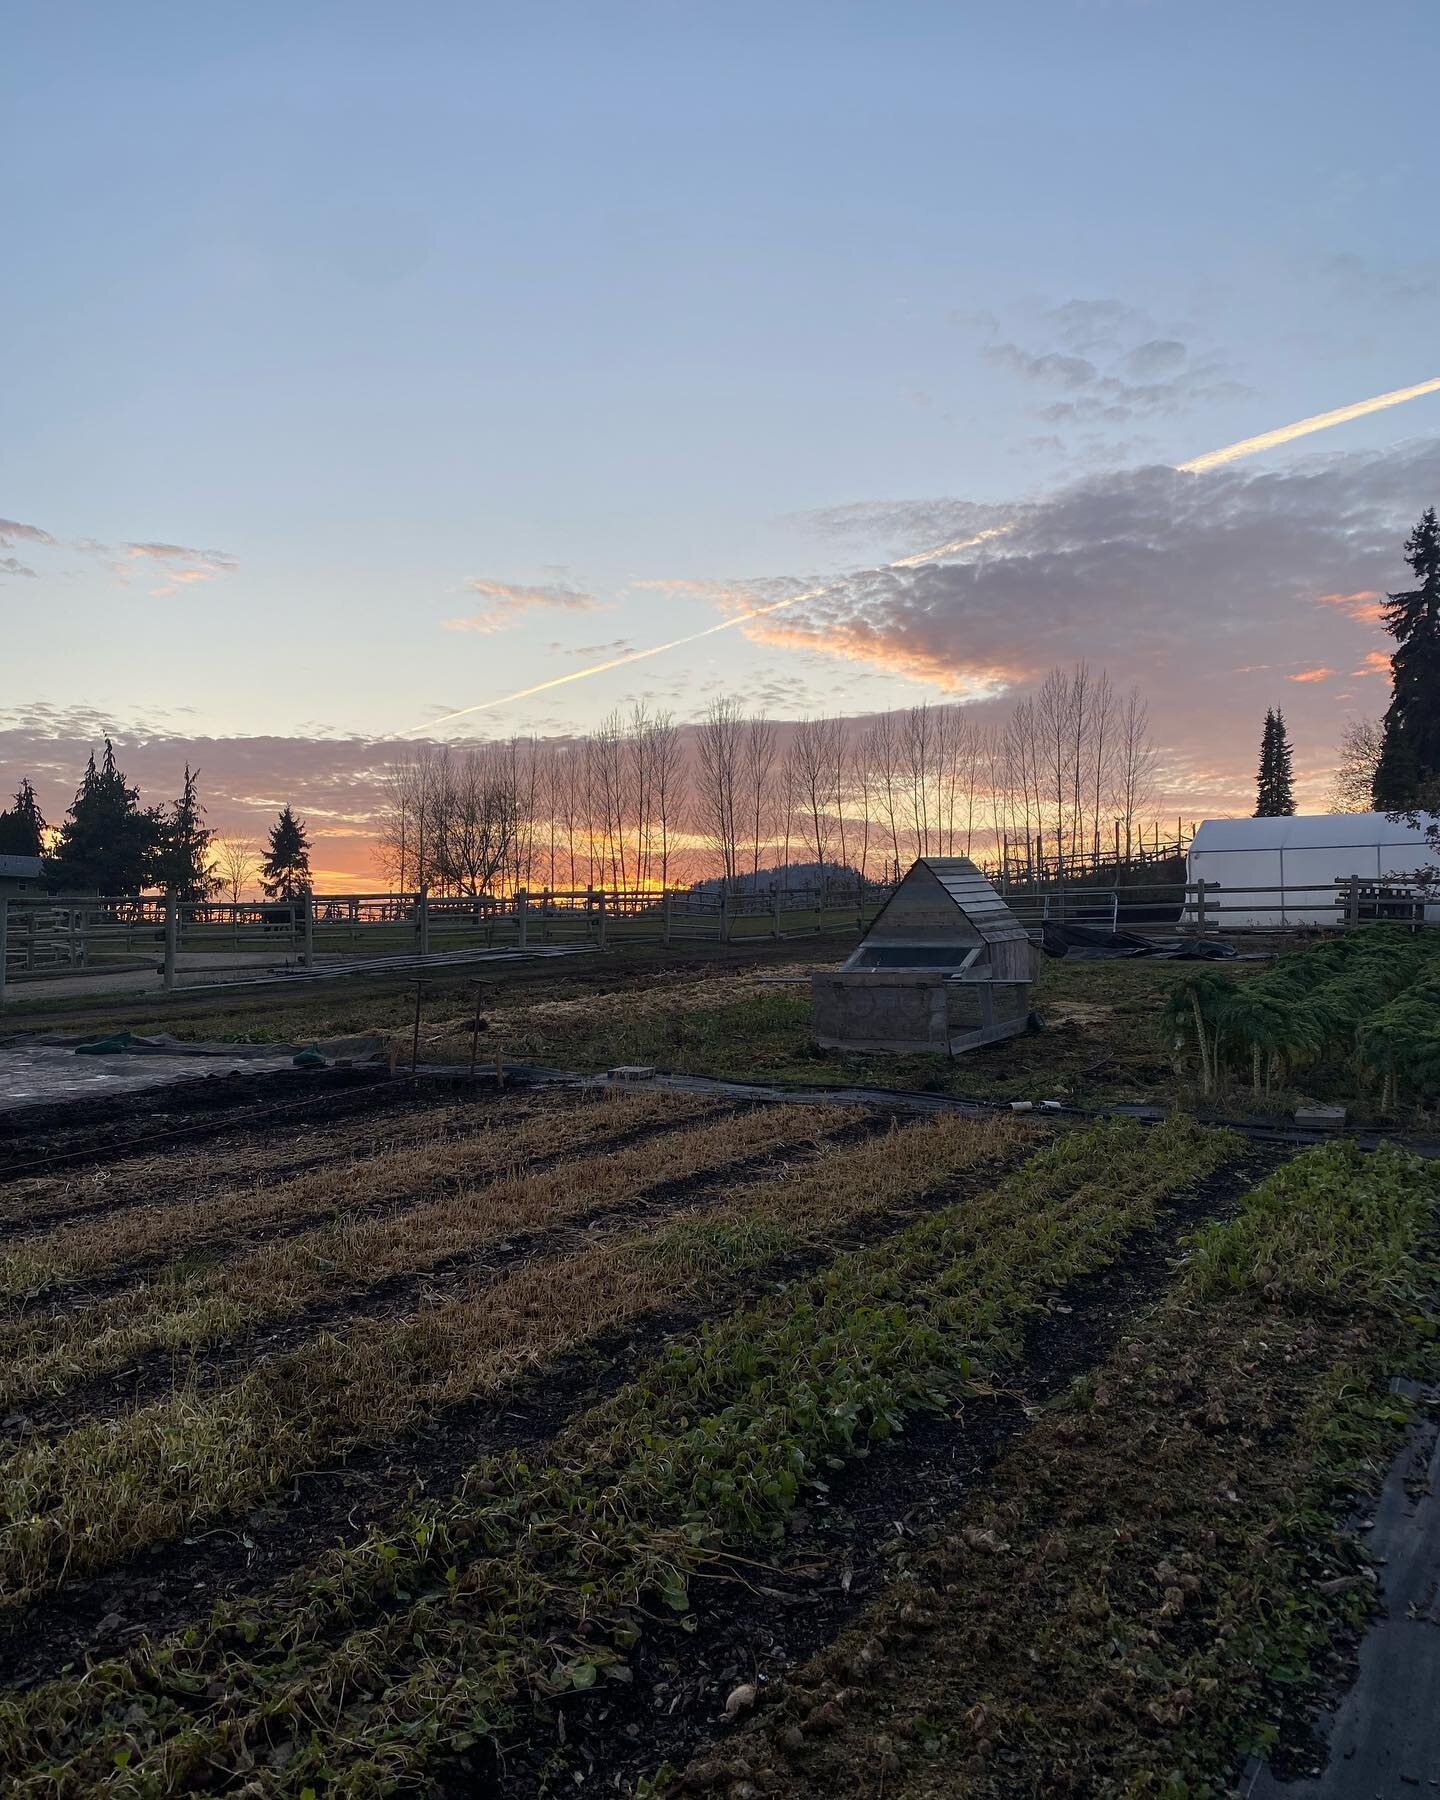 A little gratitude time! 
Thanks to all the farmers who&rsquo;ve supported me this far! @thisonefarmer @littleschack @wiseearthfarm 
I&rsquo;m happy to say that this farming venture has been profoundly challenging and overwhelmingly positive. 
Farmer